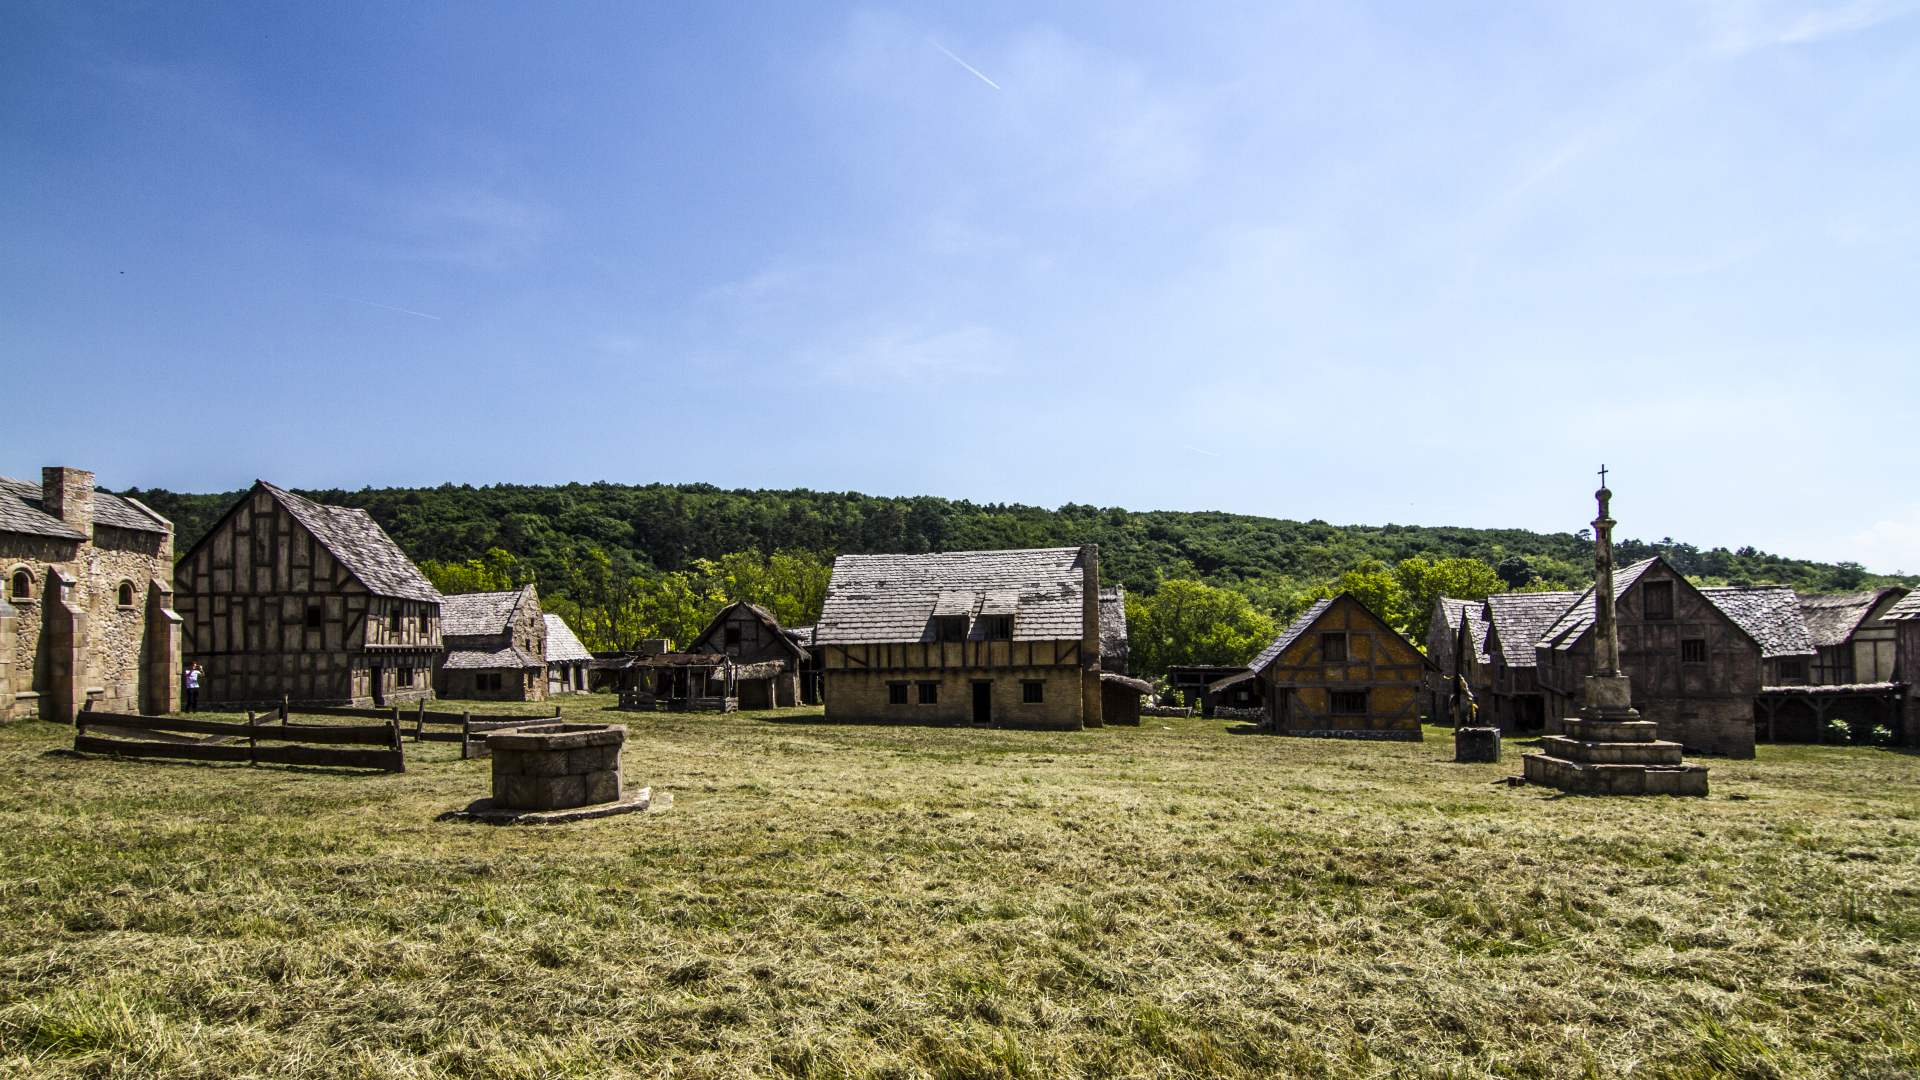 Travel in time to Medieval village